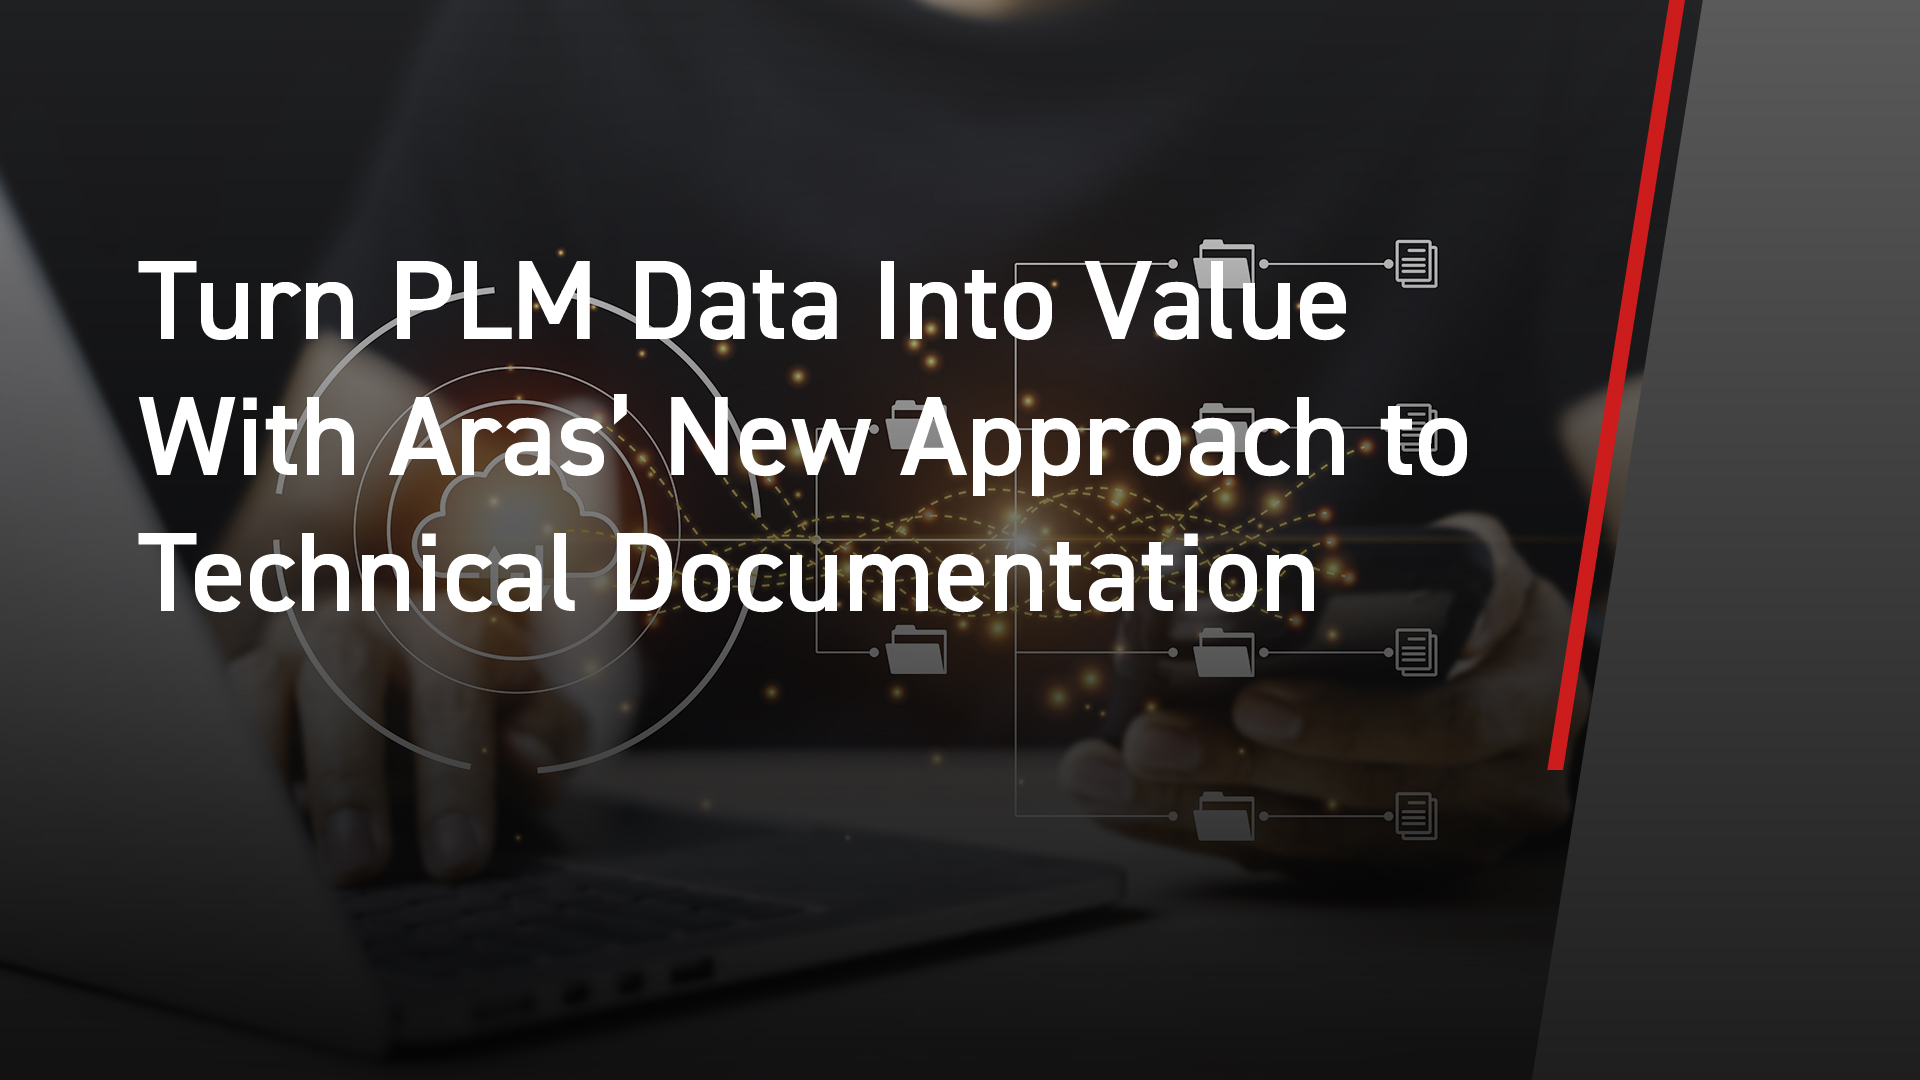 Turn PLM Data Into Value With Aras’ New Approach to Technical Documentation